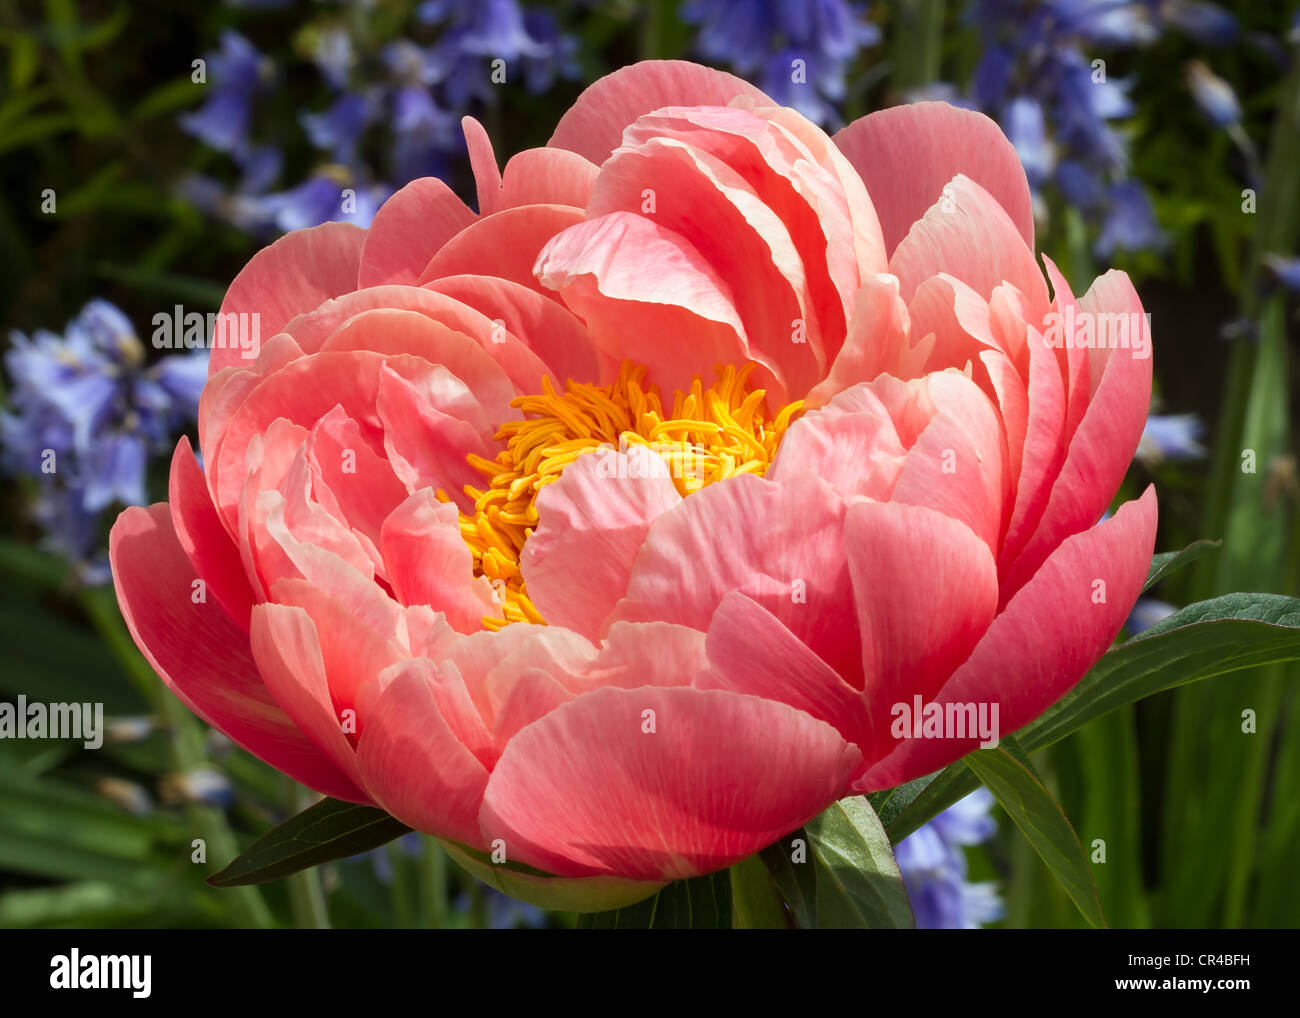 Large pink peony with bright yellow center backed by blue flowers and greenery. Stock Photo